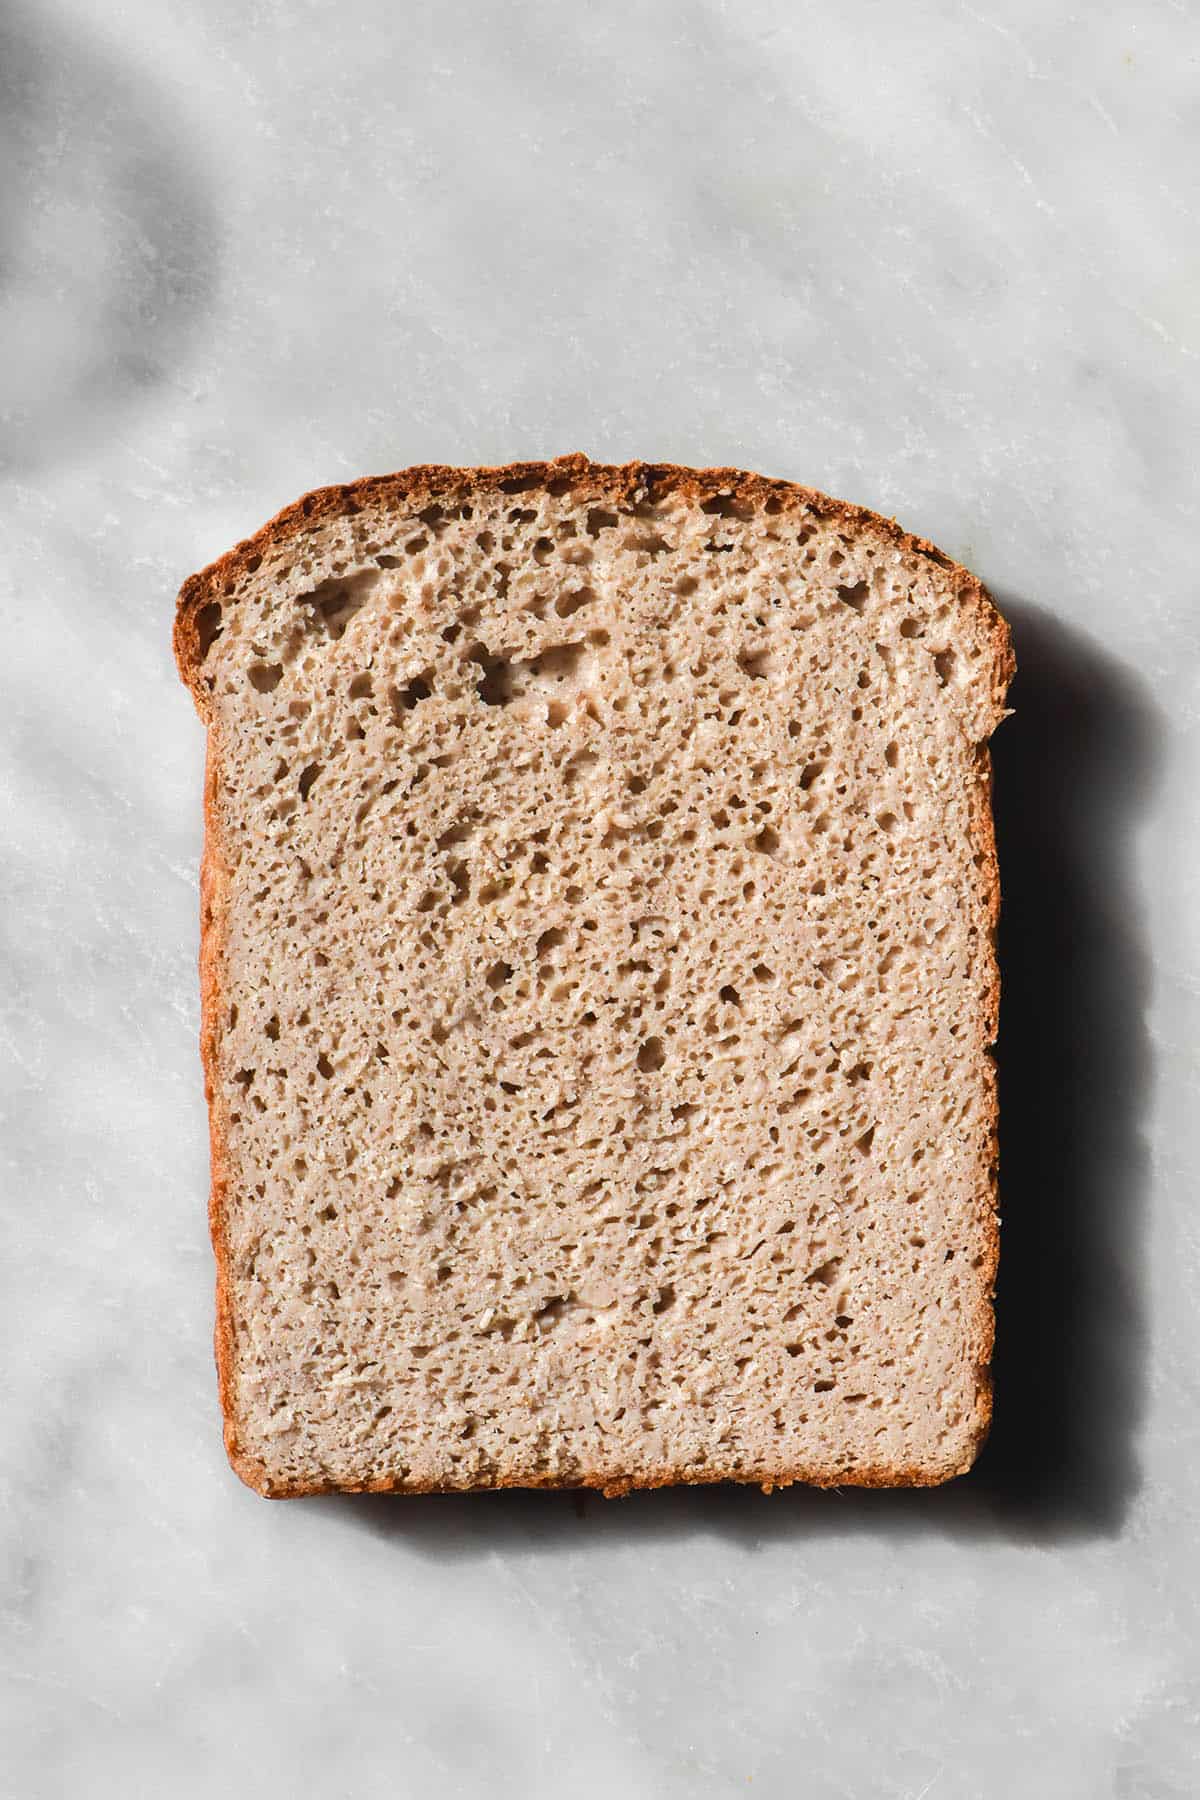 An aerial close up image of the crumb of a slice of gluten free vegan high protein bread atop a white marble table